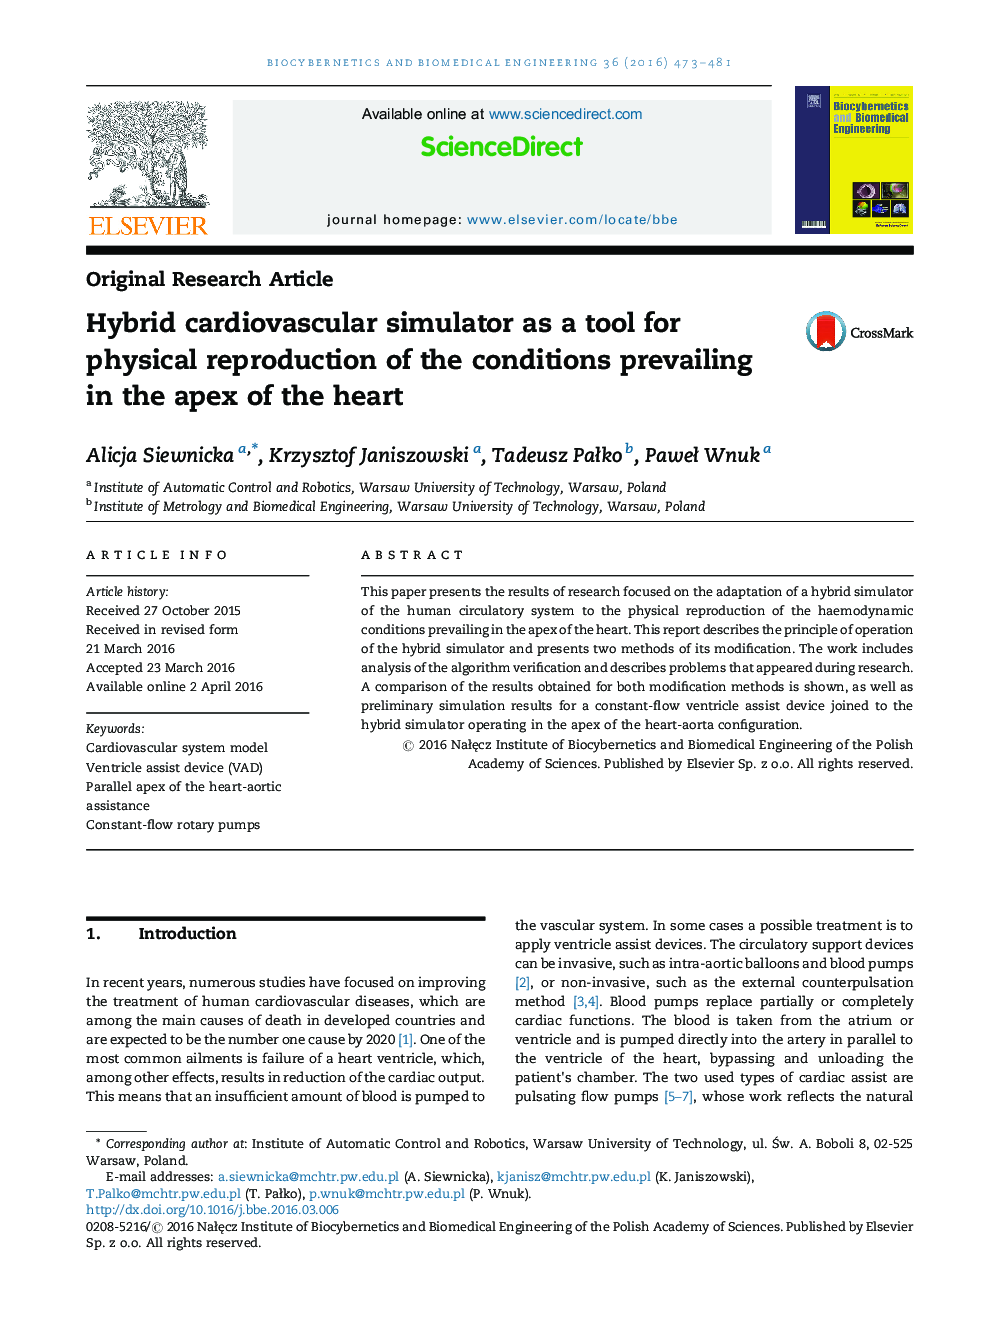 Hybrid cardiovascular simulator as a tool for physical reproduction of the conditions prevailing in the apex of the heart